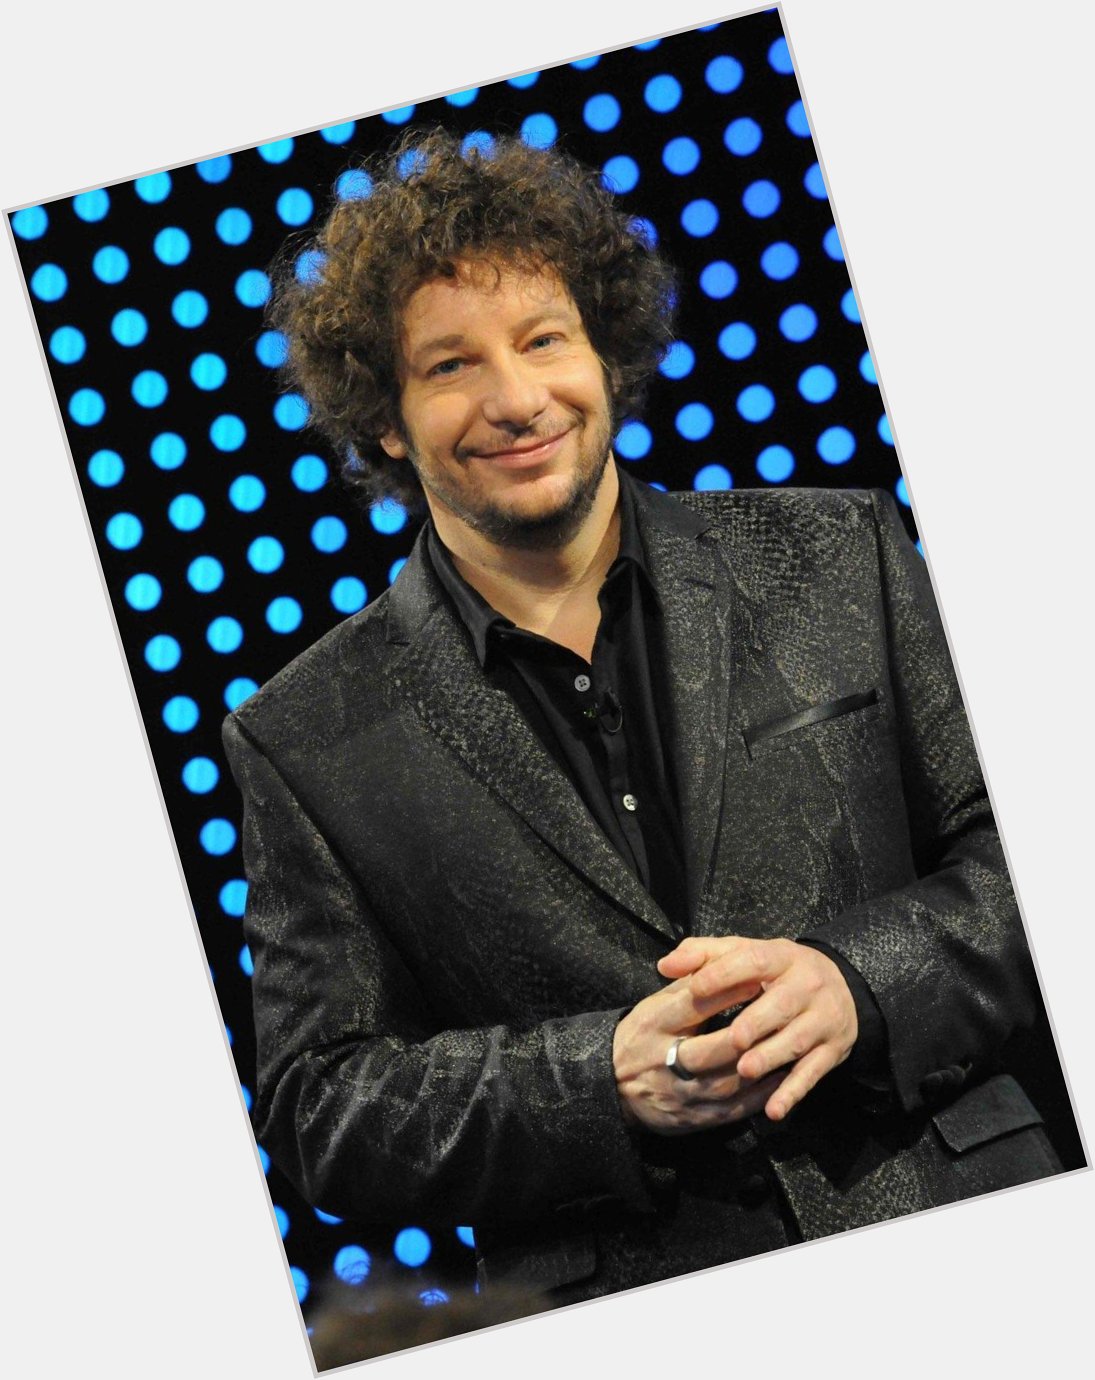 Happy Birthday to Jeff Ross, who turns 50 today! 